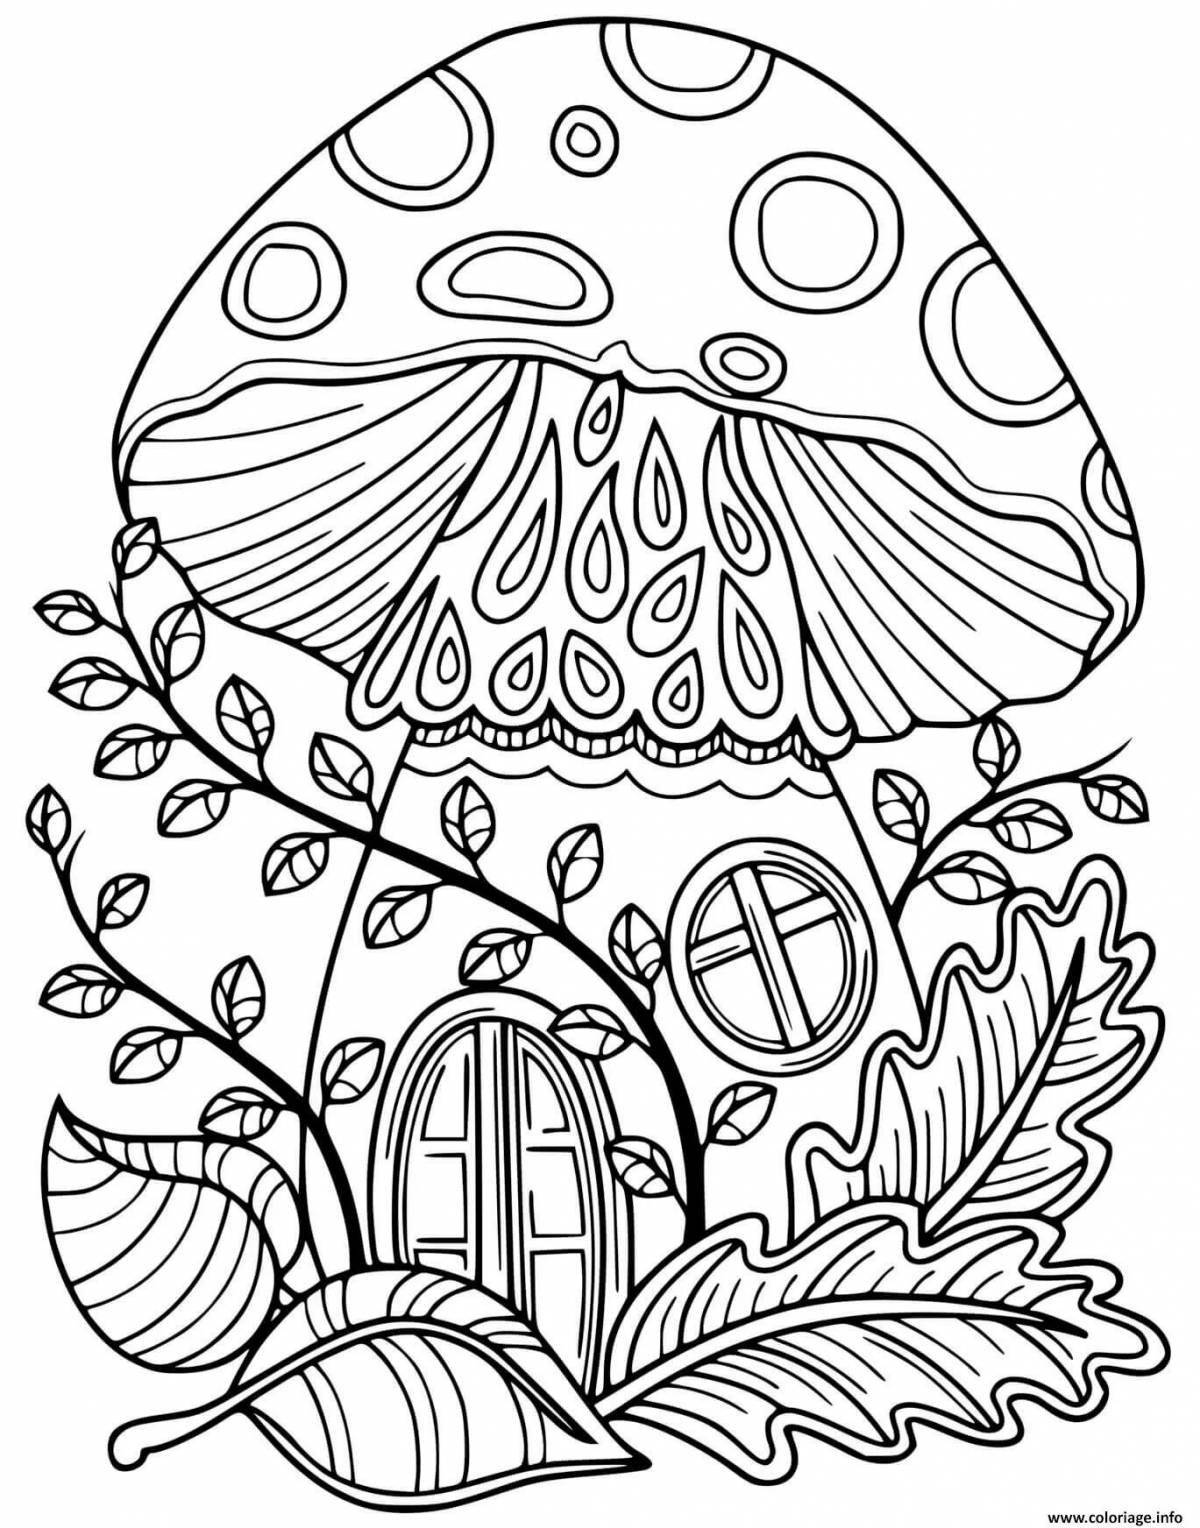 Coloring book harmonious letter eater antistress